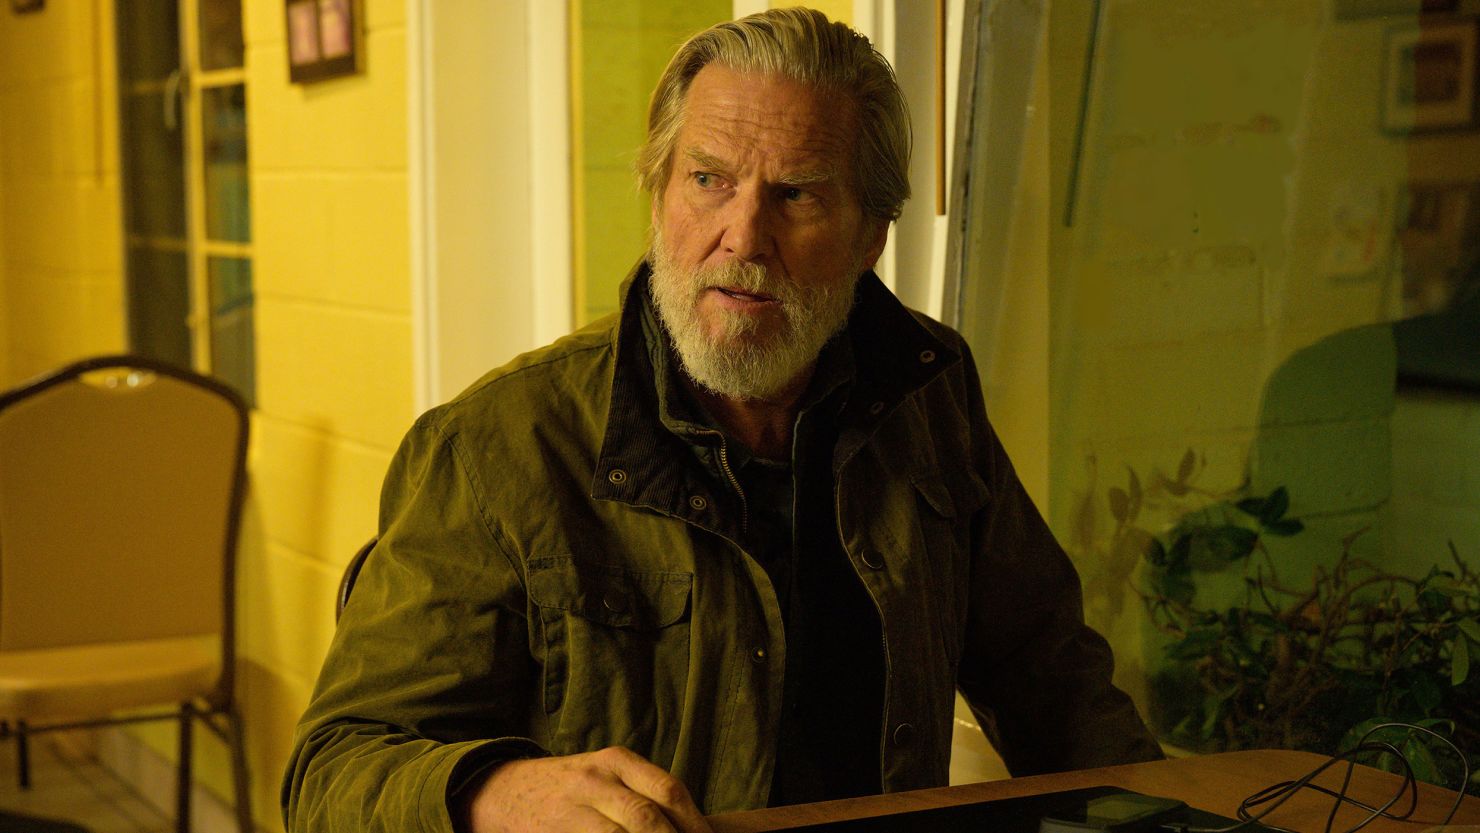 Jeff Bridges plays an agent living off the grid in FX's 'The Old Man.'